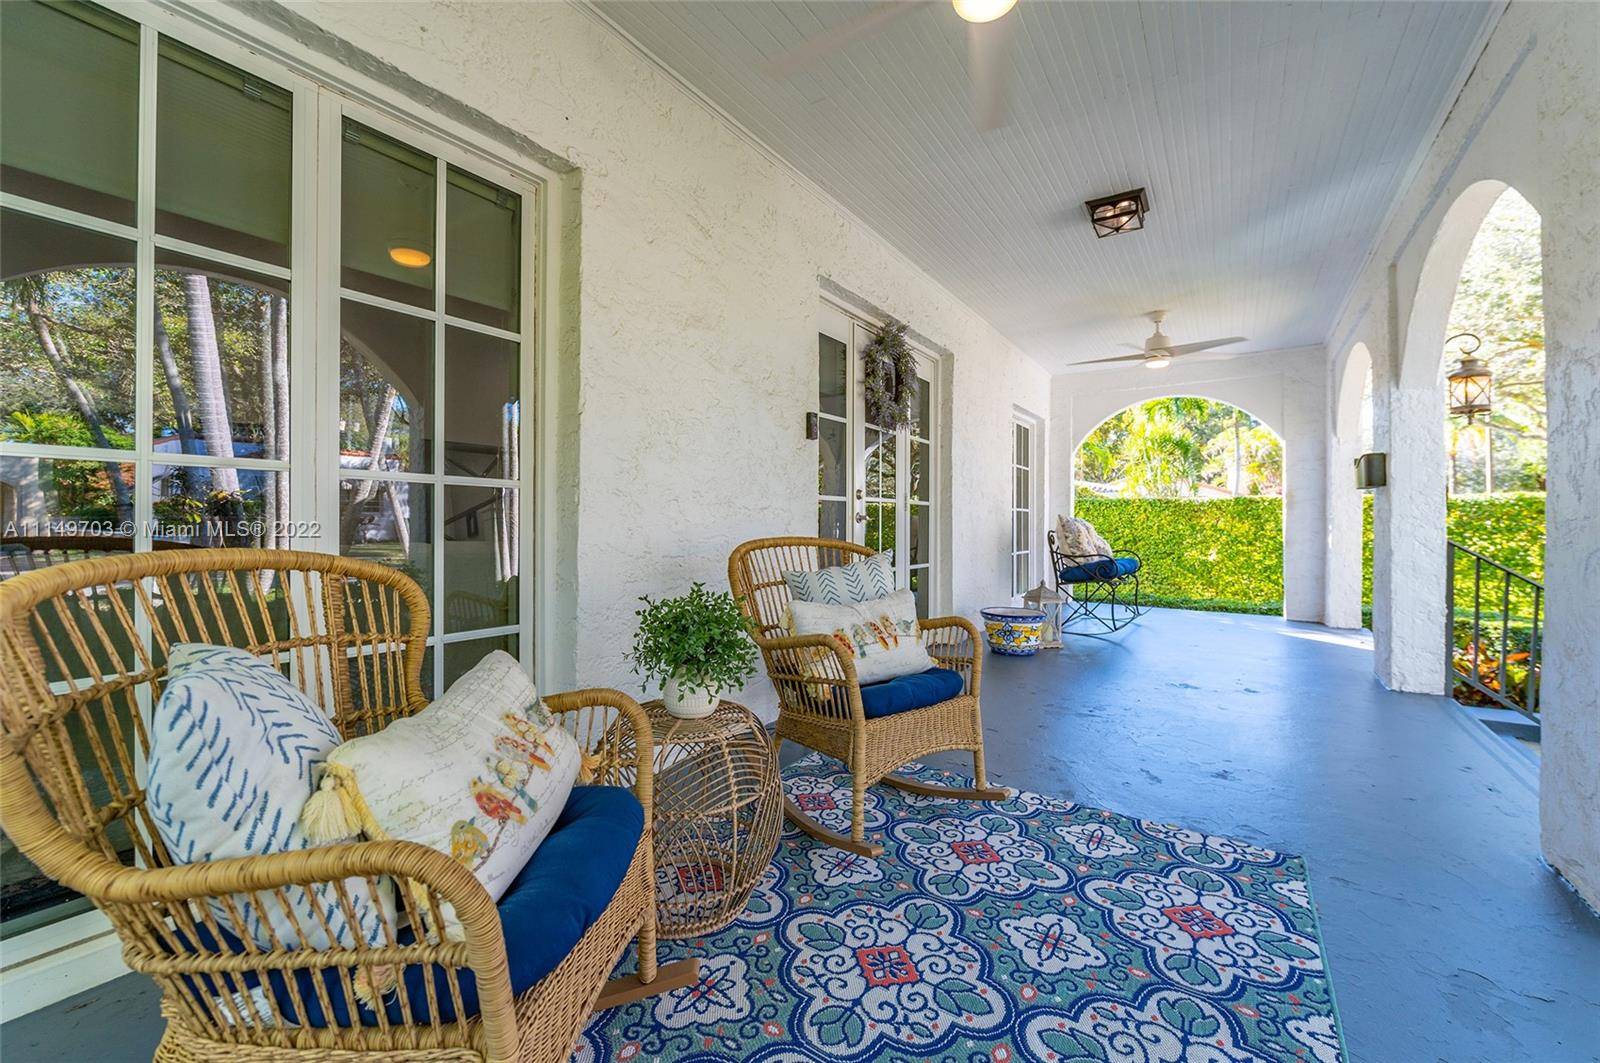 Back on the market ! Light, airy and charming, this updated Coral Gables Old Spanish style home features bright interiors and delightful details.